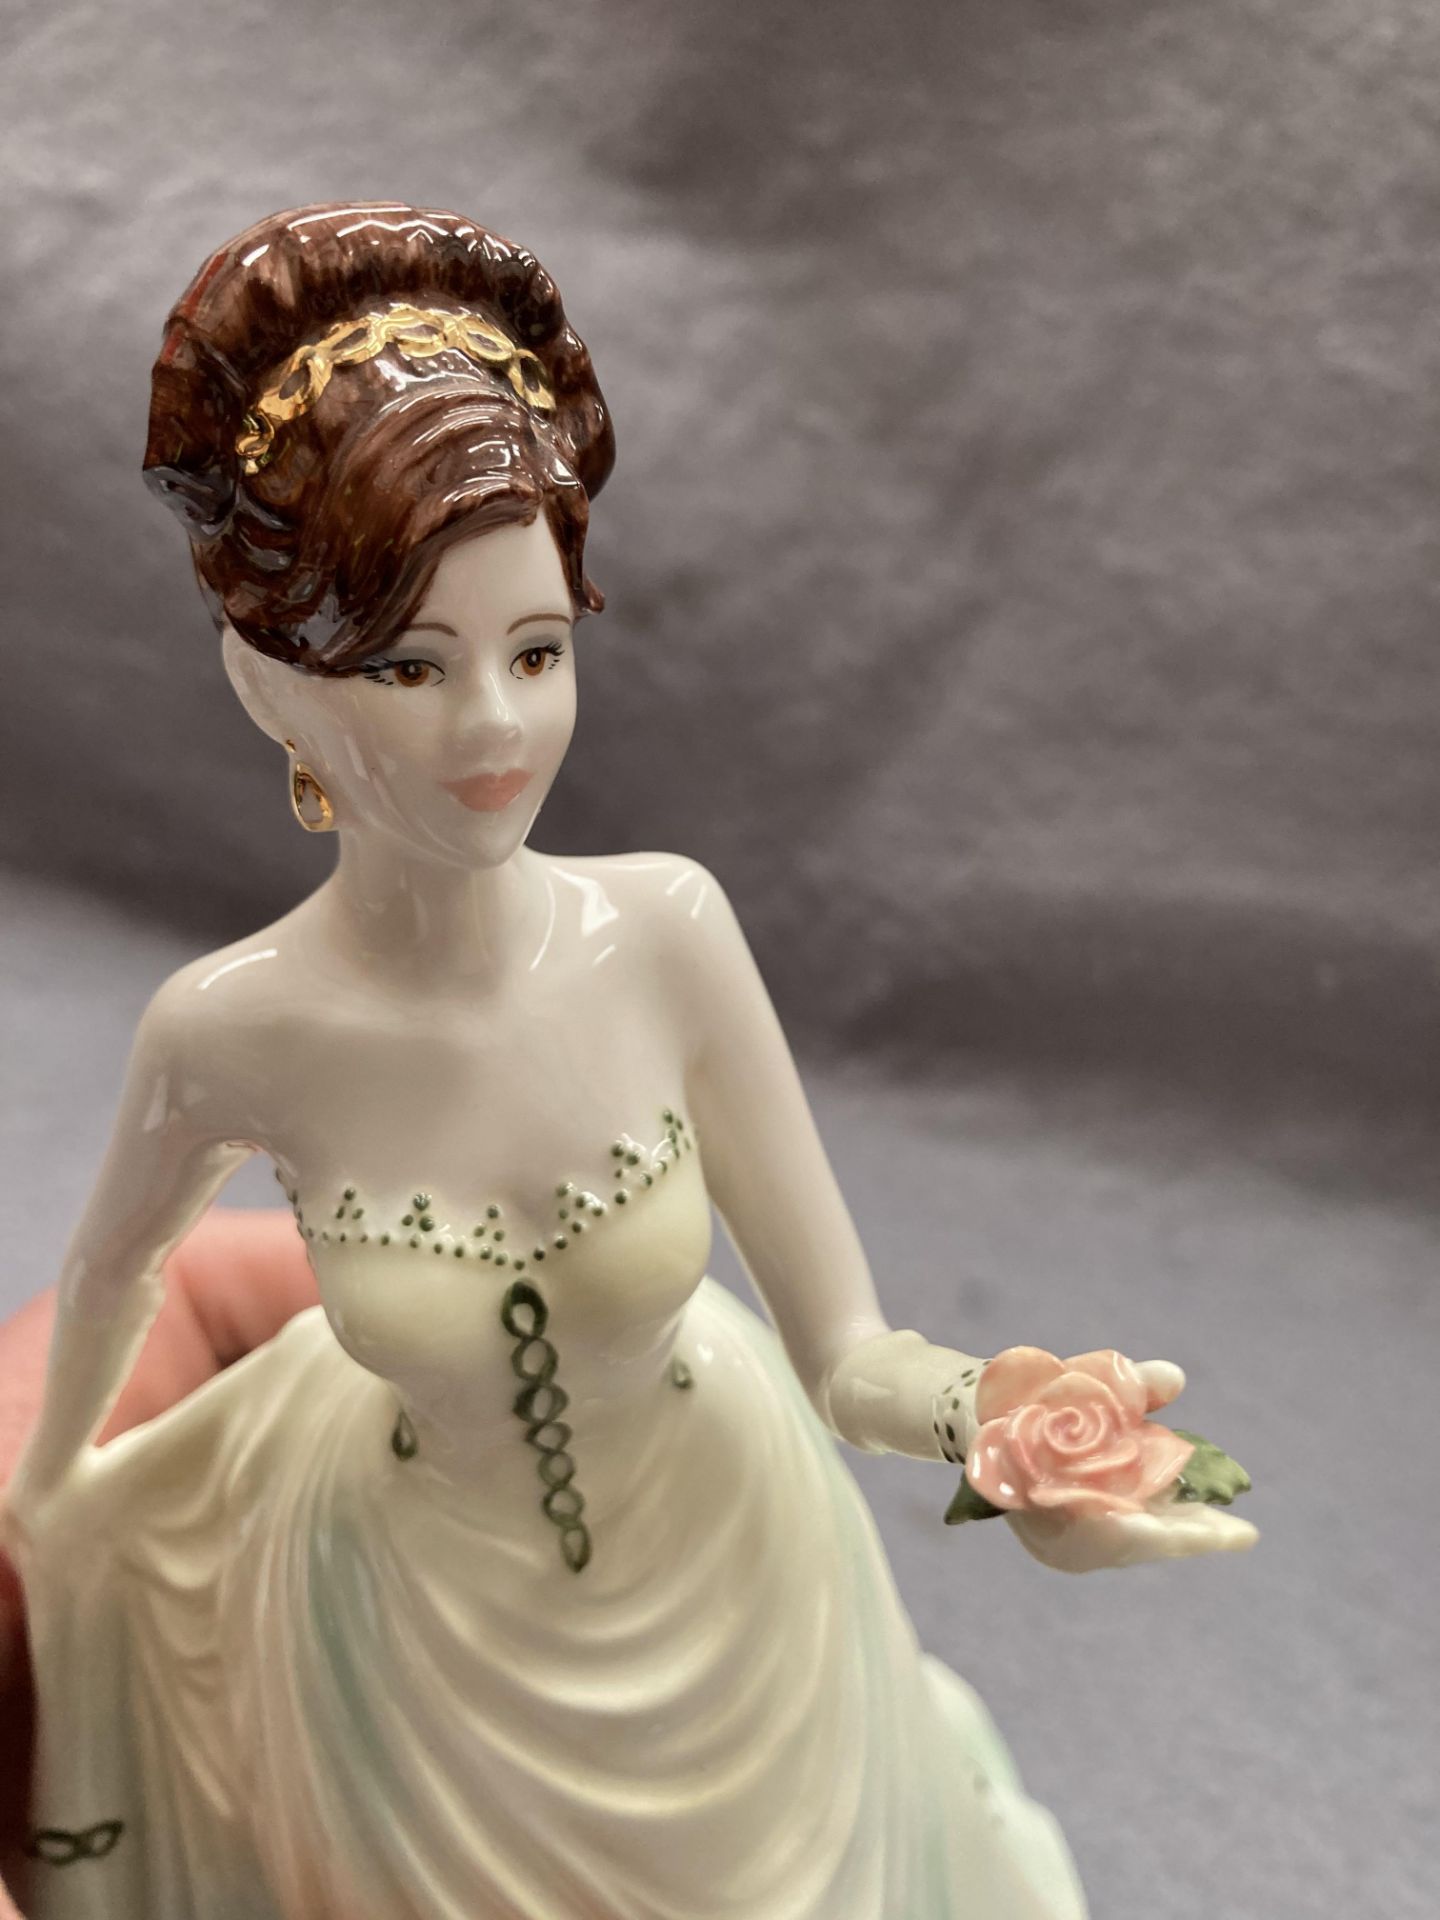 Six Coalport bone china and porcelain figurines - Congratulations, Togetherness Mother's Day, - Image 20 of 34